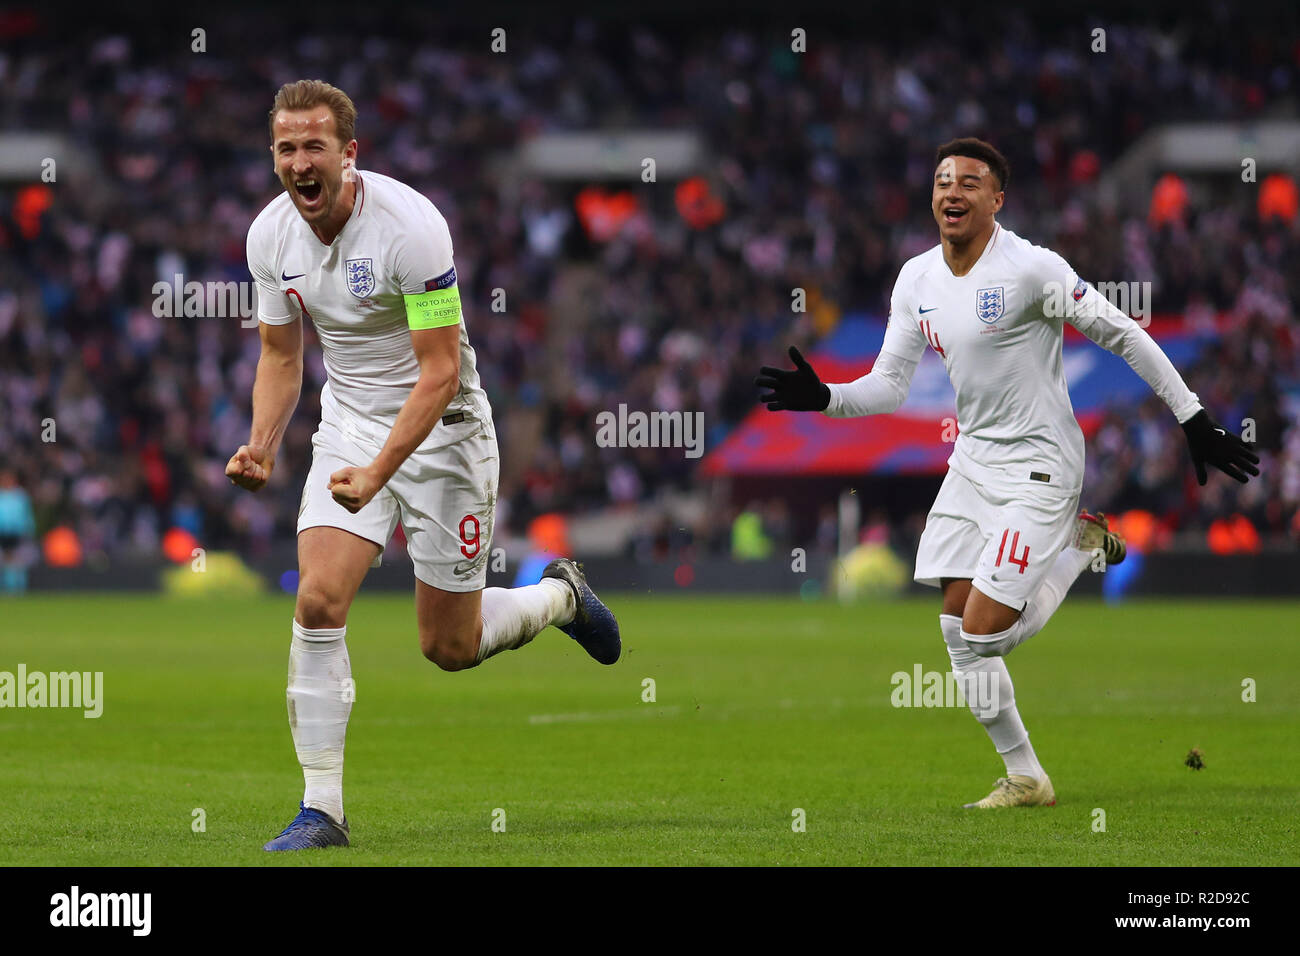 harry-kane-of-england-celebrates-after-scoring-his-sides-second-and-winning-goal-putting-england-2-1-ahead-england-v-croatia-uefa-nations-league-group-a4-wembley-stadium-london-18th-november-2018-R2D92C.jpg